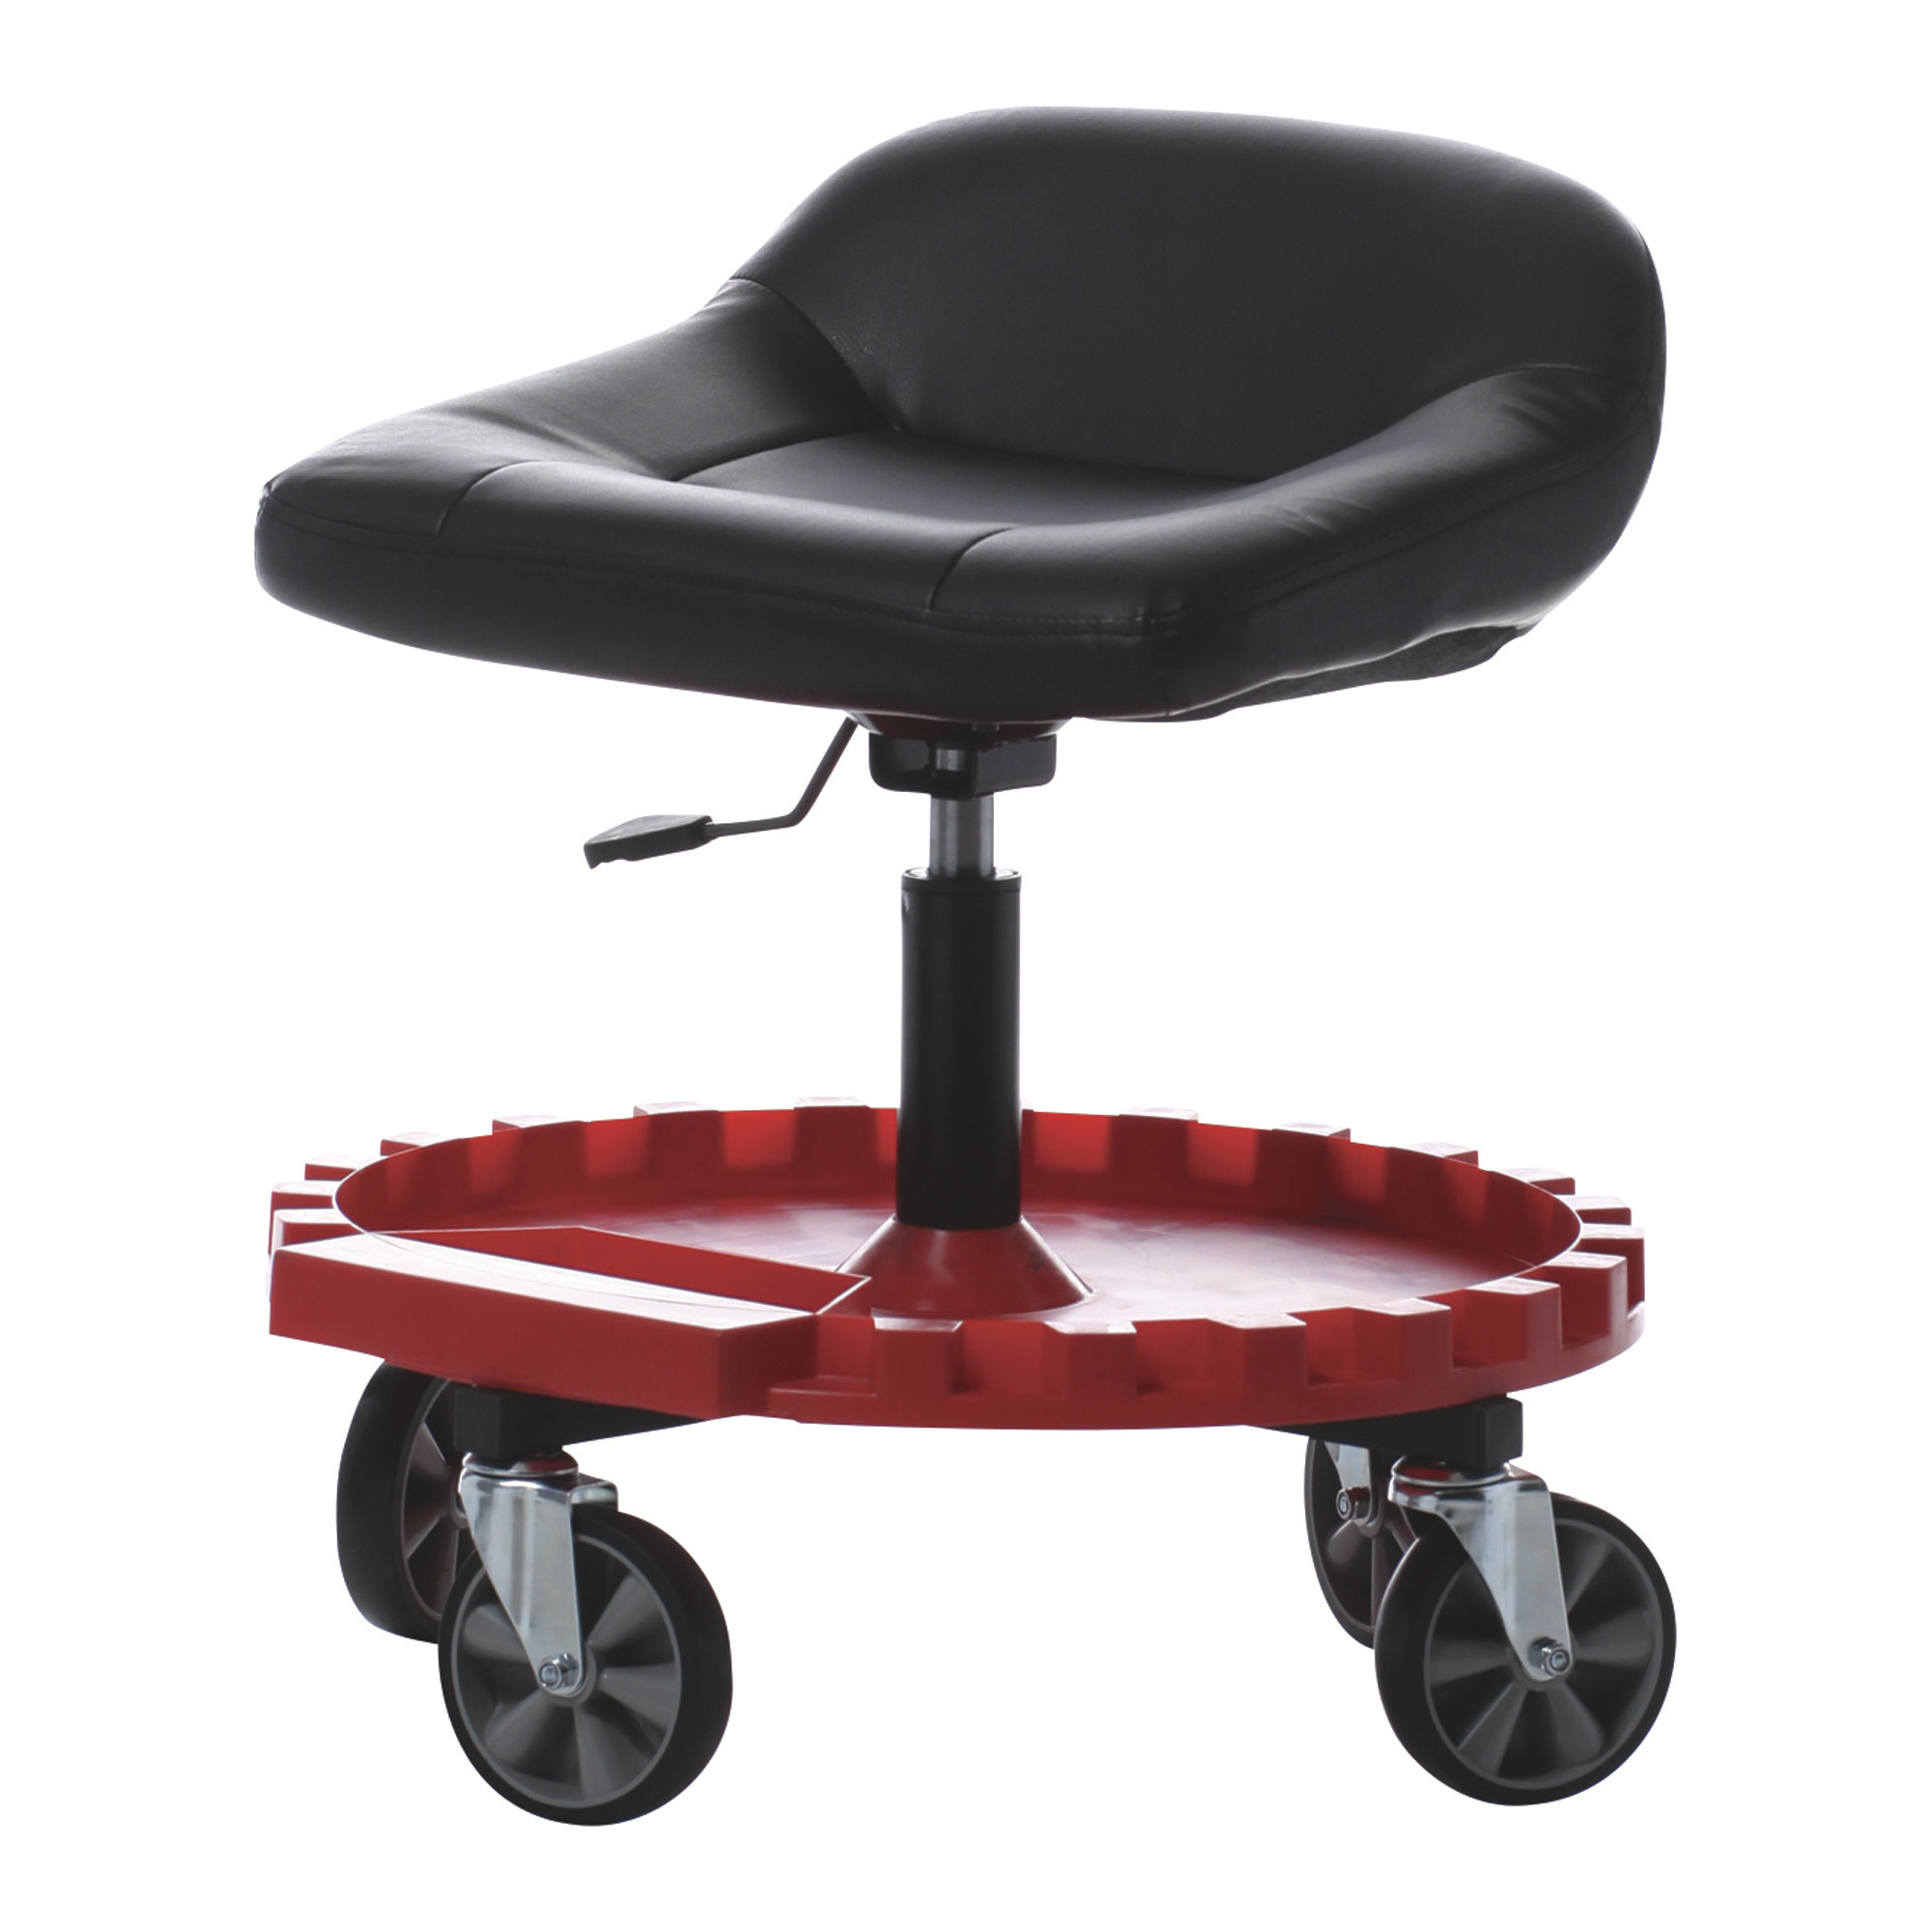 Traxion GearSeat Adjustable Shop Stool with Casters and Tool Tray â Steel, 350-Lb. Capacity, 13 1/2 to 17 1/2Inch Seat Height, Model 2-230